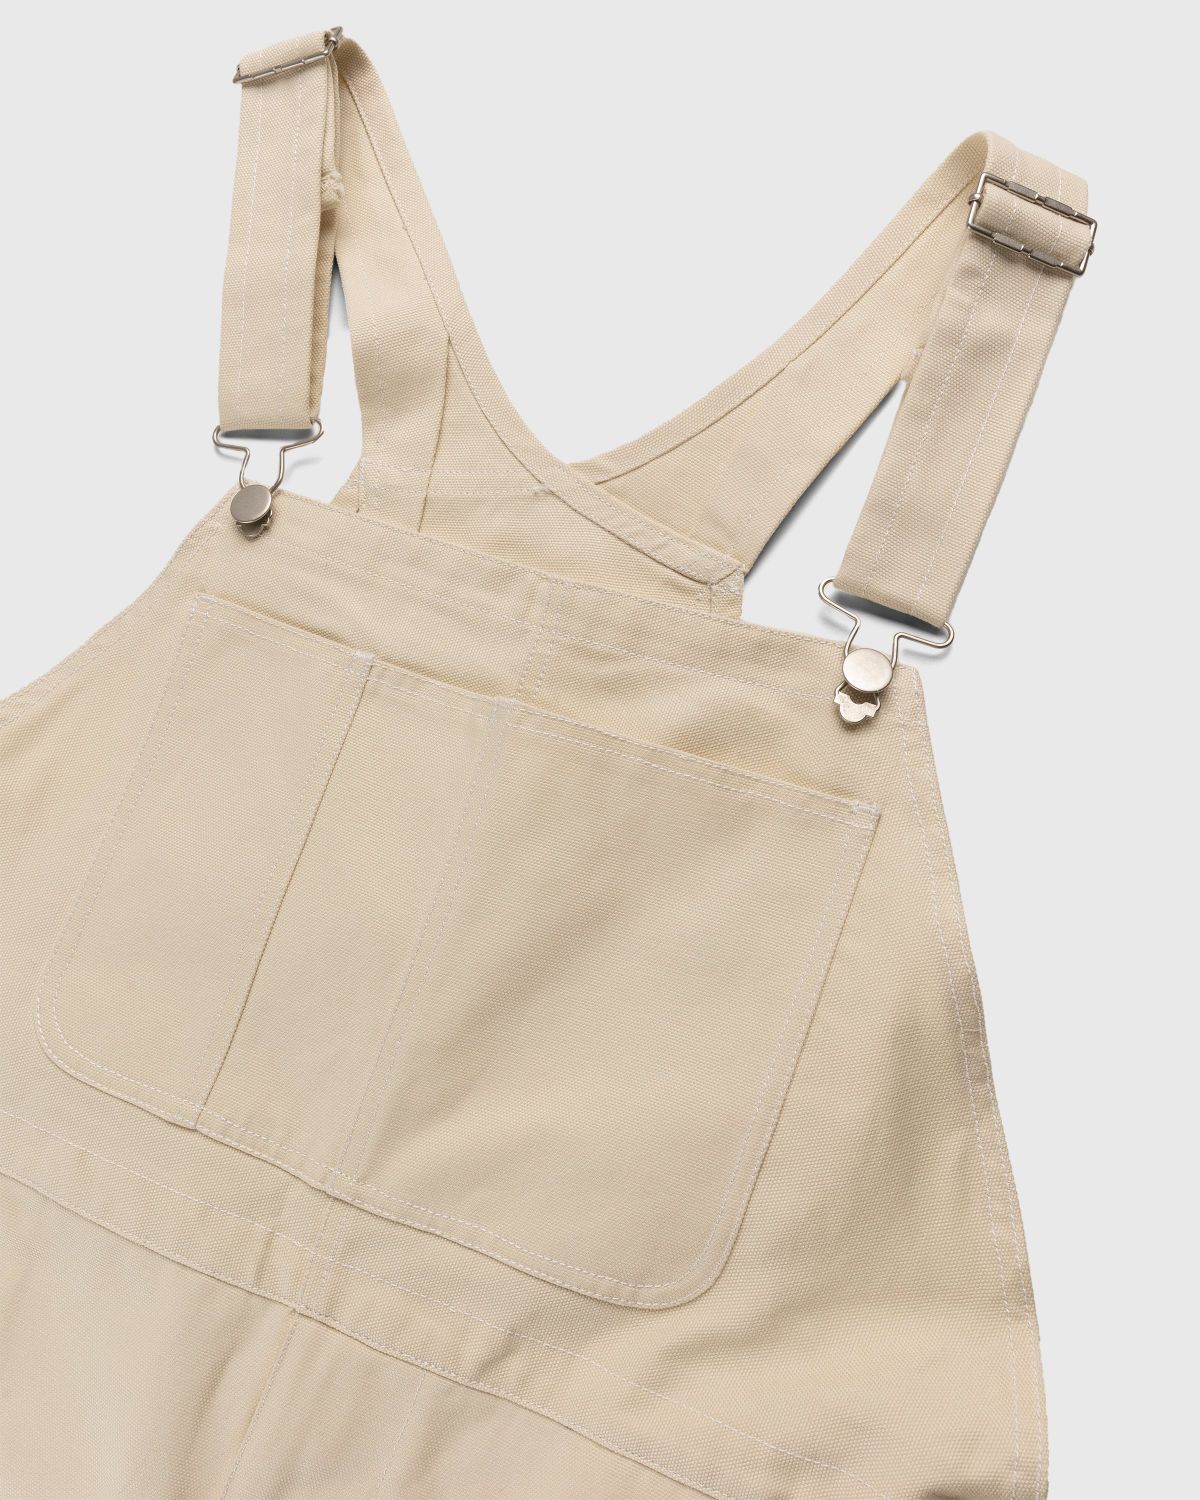 RUF x Highsnobiety – Cotton Overalls Natural - Pants - Beige - Image 5